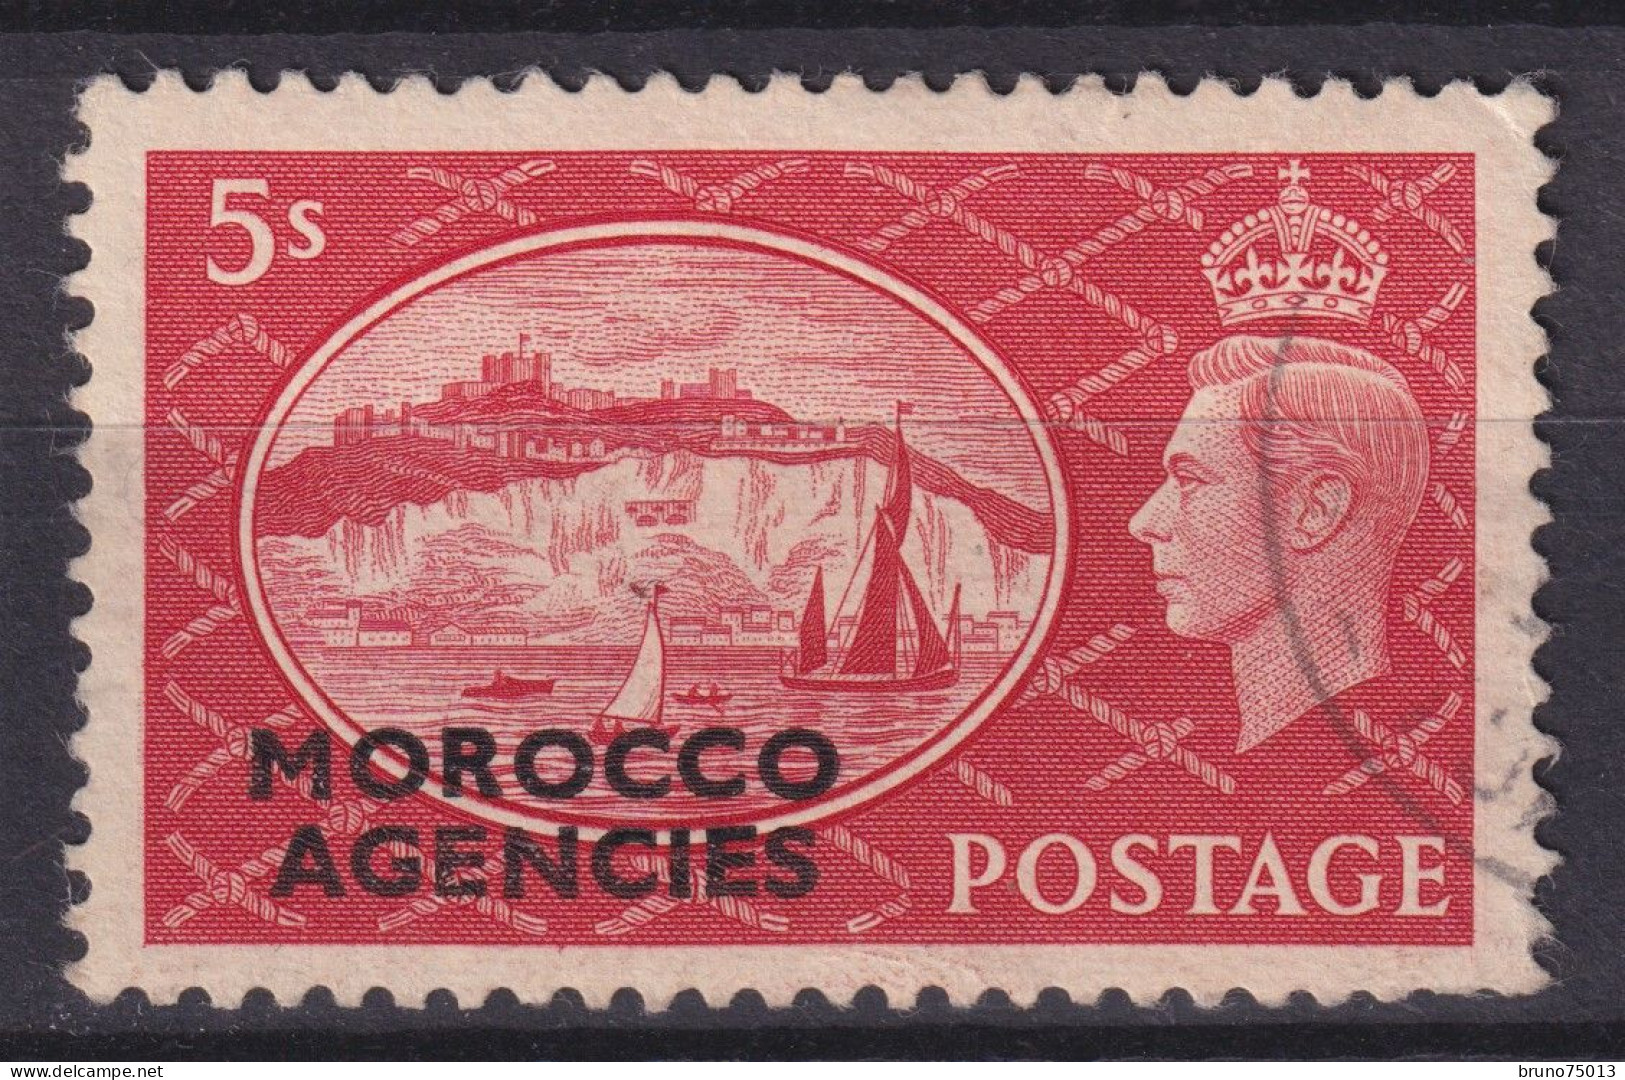 SG 100 Used - Morocco Agencies / Tangier (...-1958)